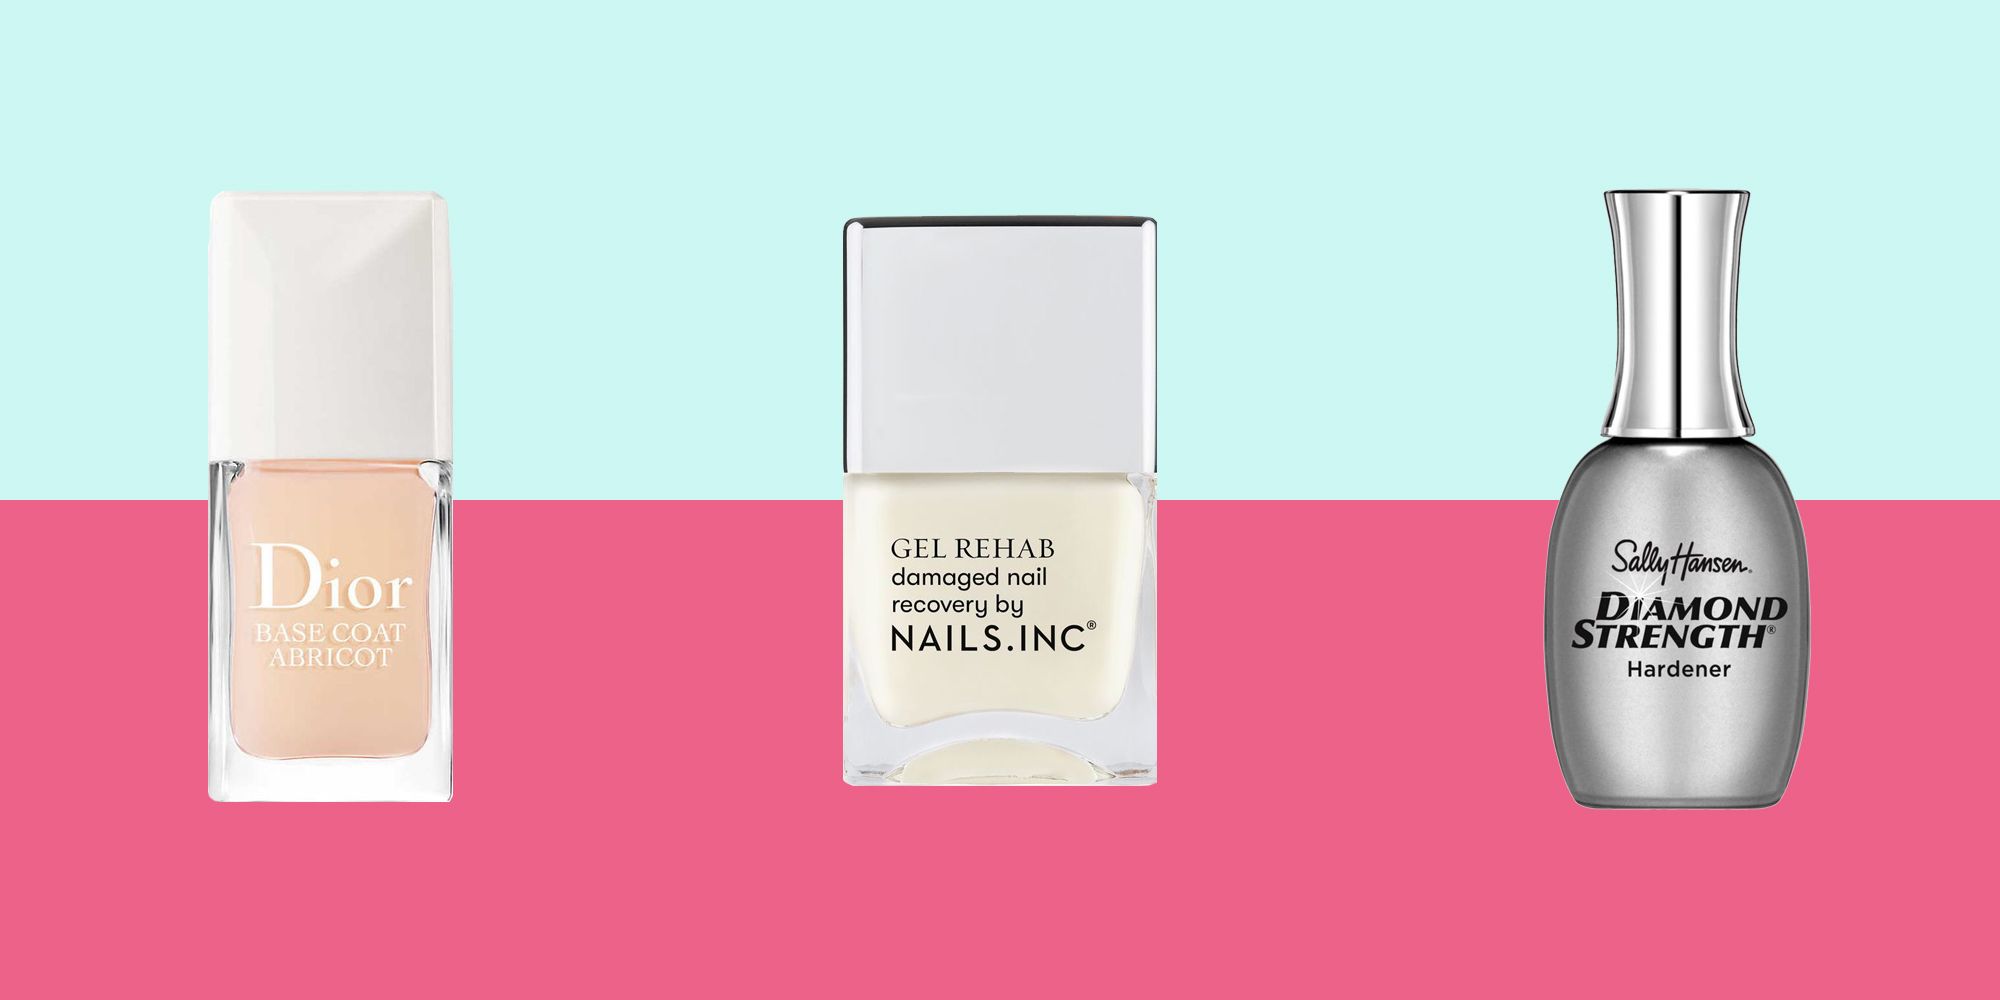 2. The Best Nail Polish for Kids: Safe and Non-Toxic Options - wide 5